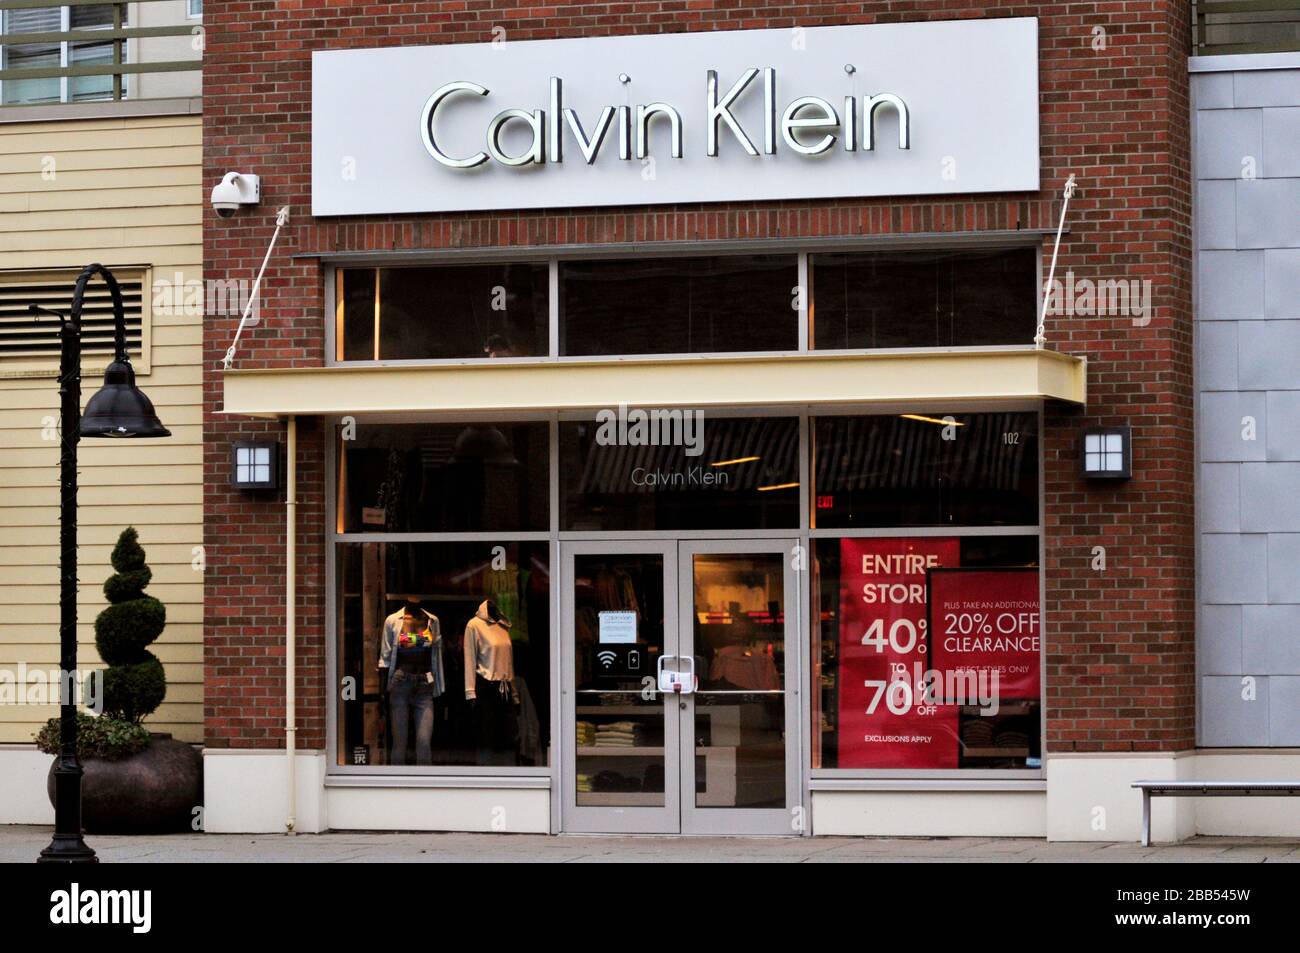 Surrey, , Canada. 29th Mar, 2020. A sign is seen in the window of a  closed Calvin Klein retail store location, during the COVID-19 pandemic.  Photo by Adrian Brown/Sipa USA Credit: Sipa